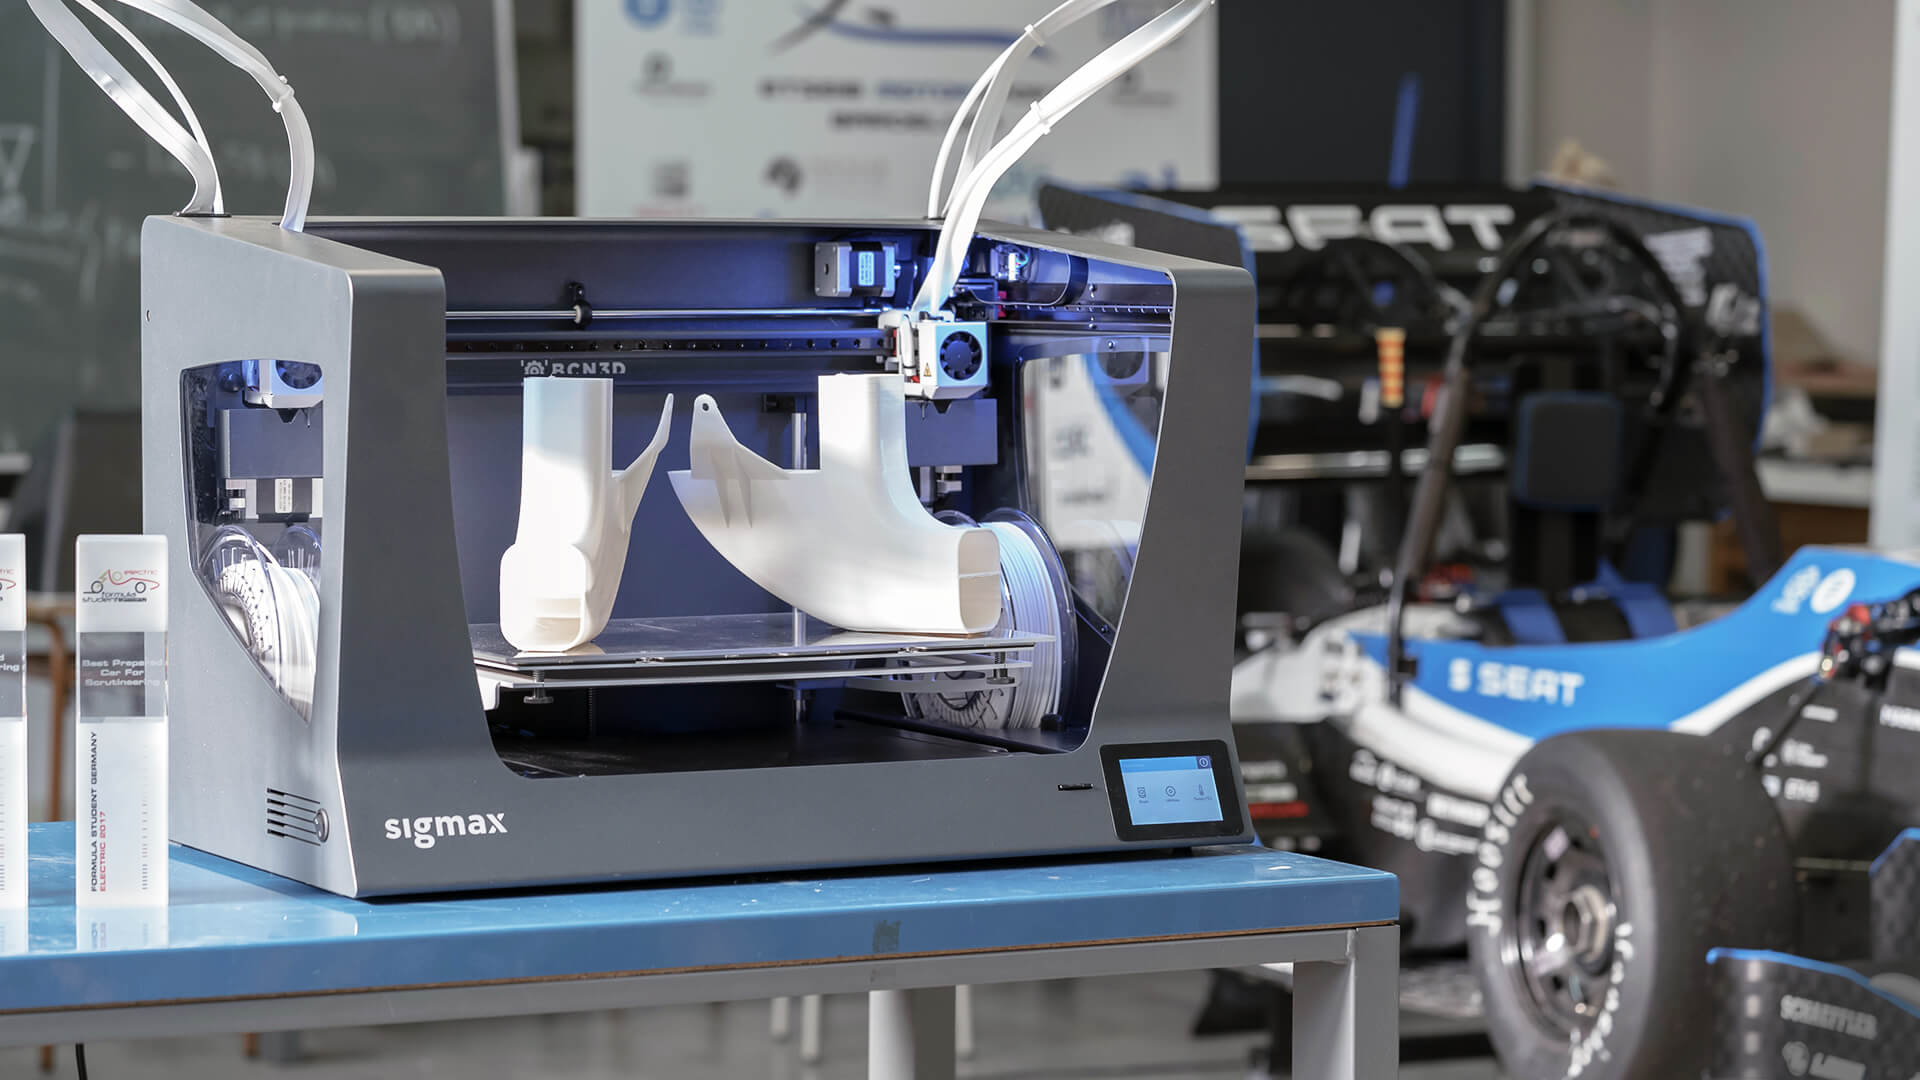 The 10 Best Large 3D Printers in 2020 - Best Large 3D Printers